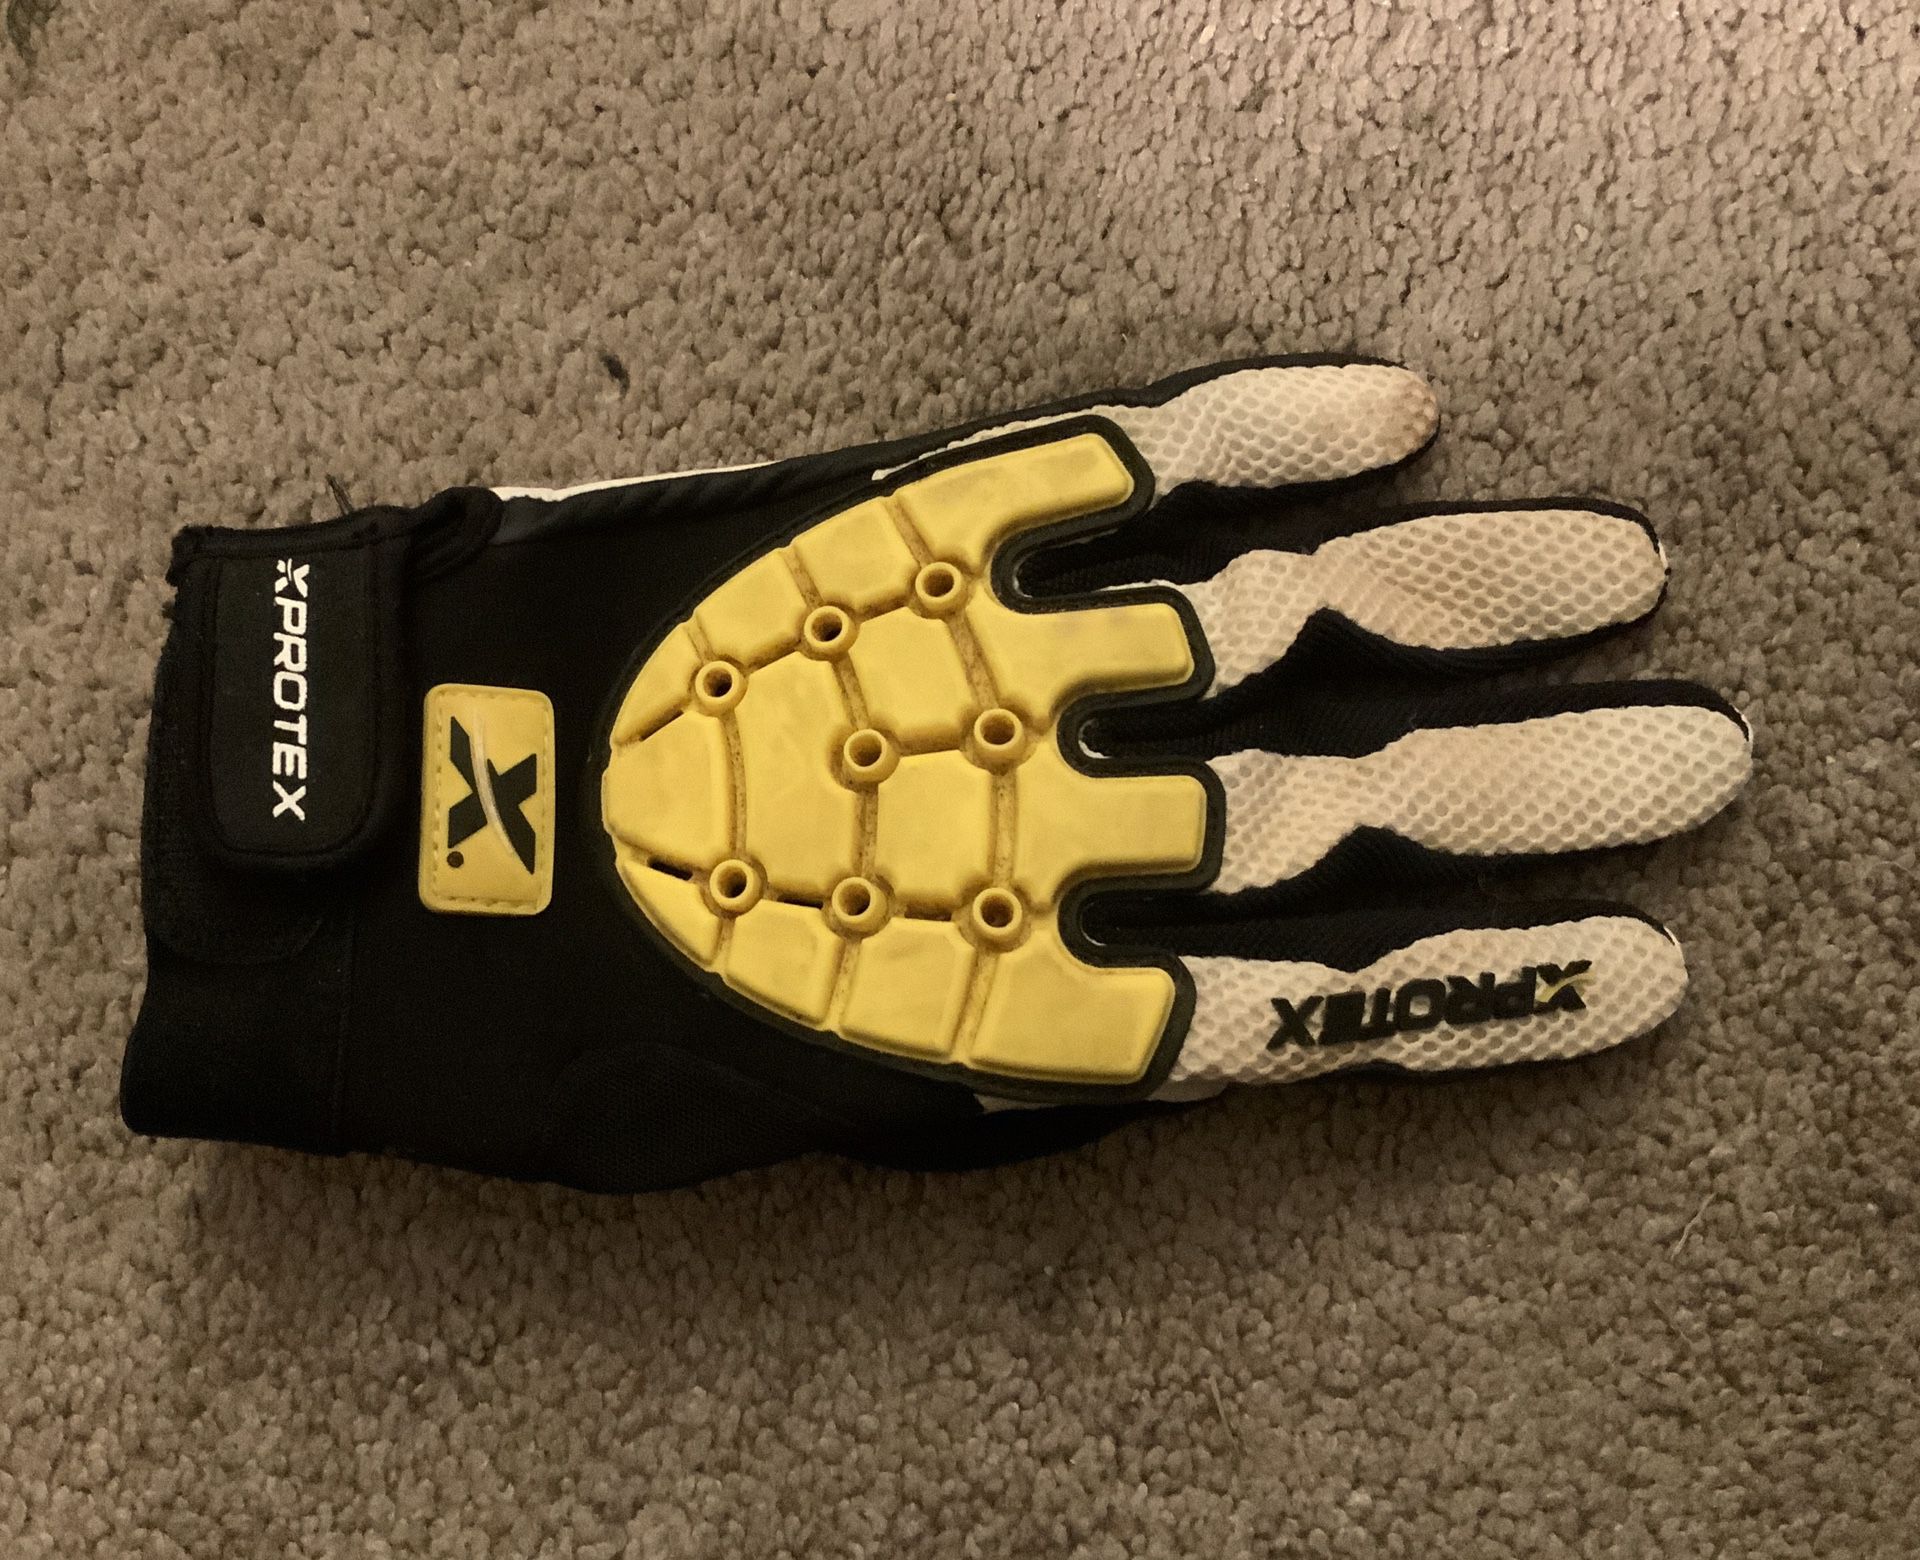 PROTECTIVE GLOVE FOR CATCHERS.